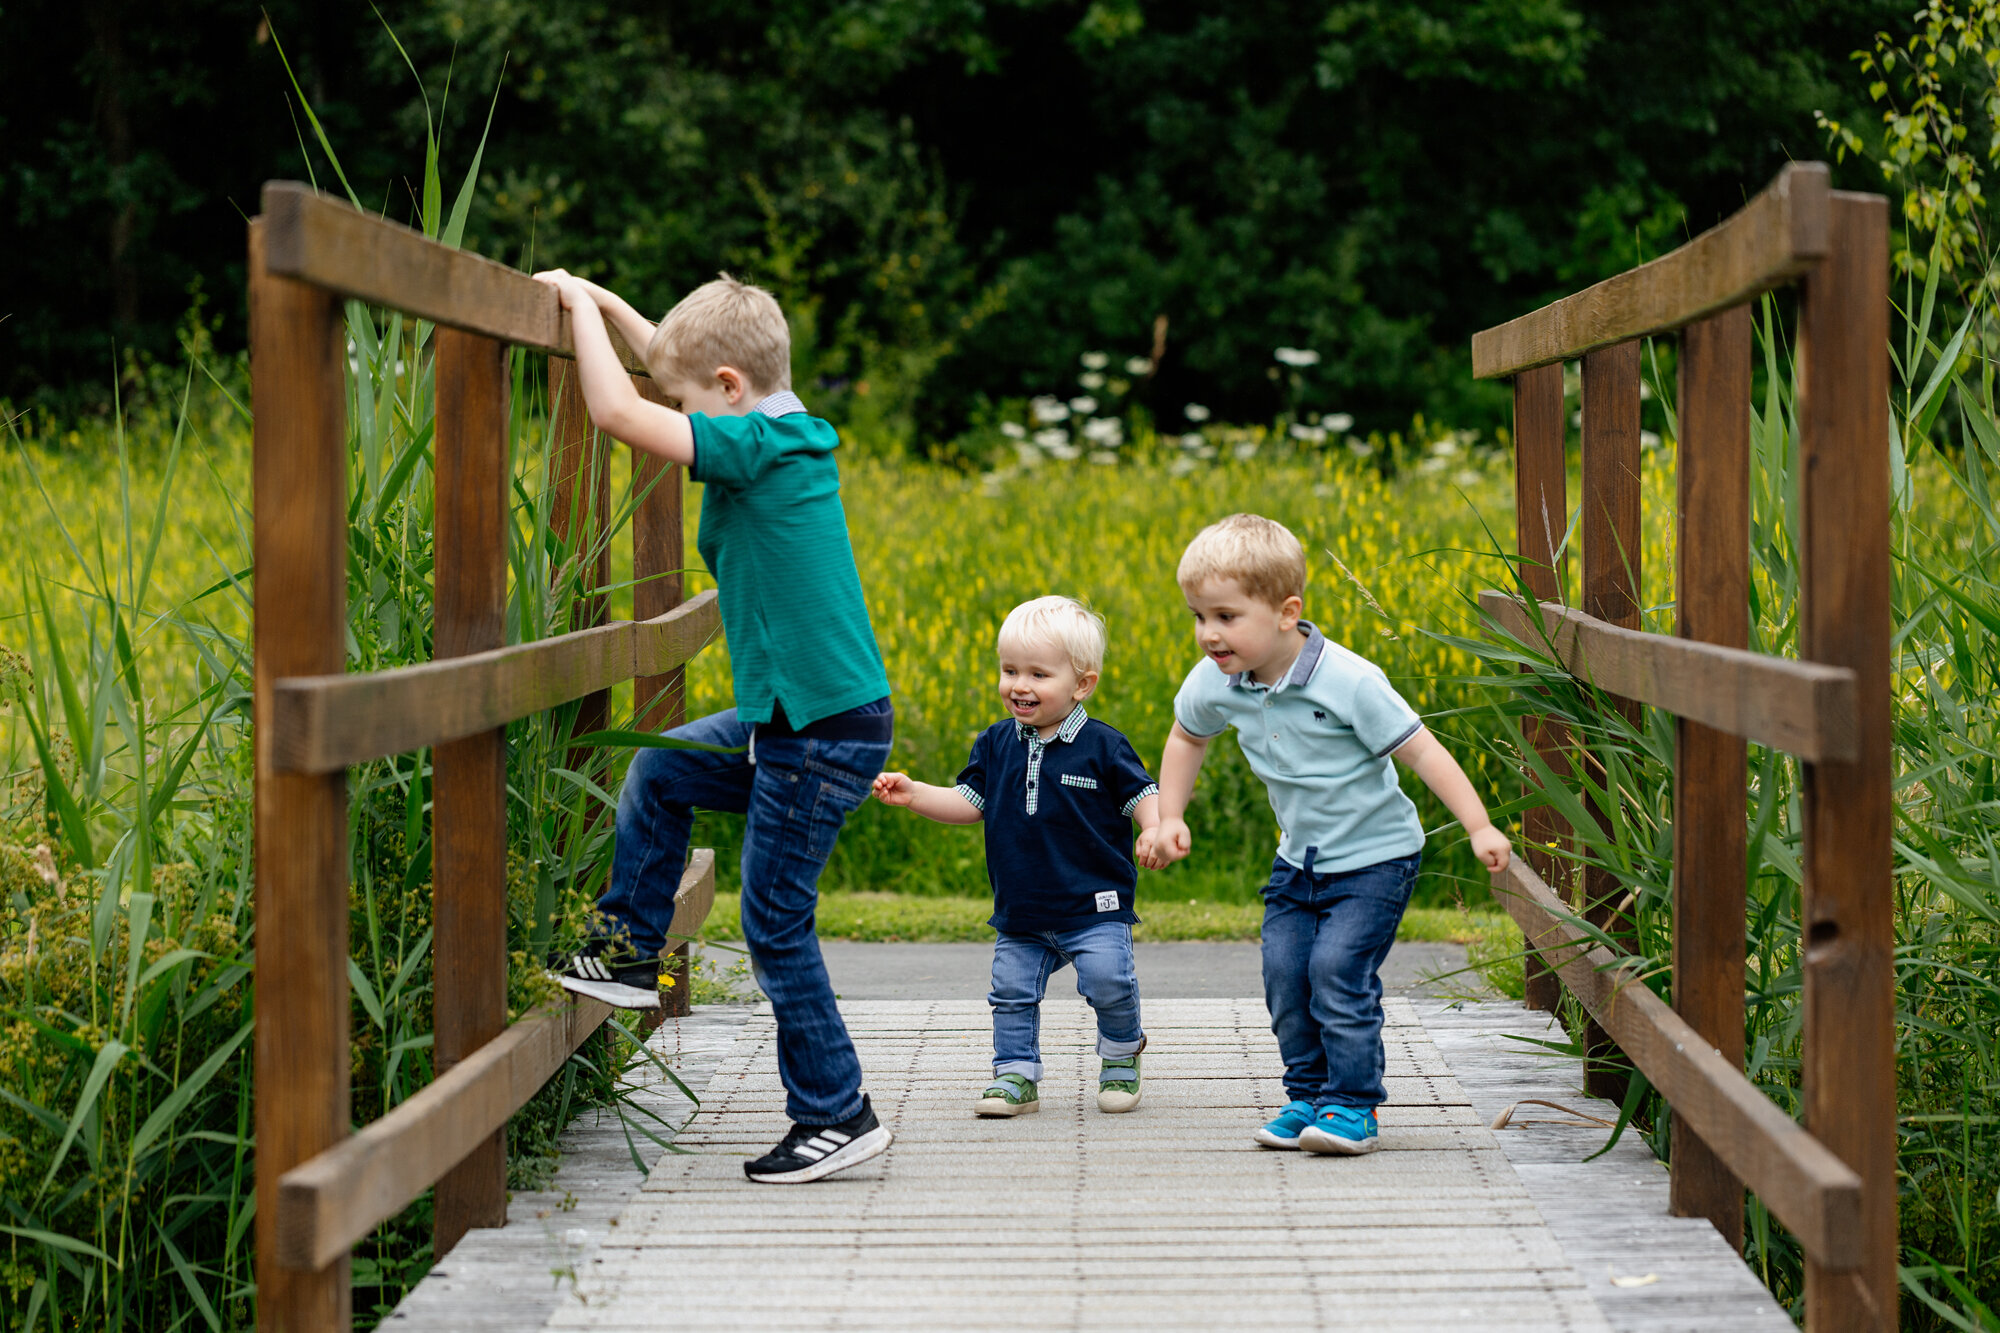 children's photographer near cardiff in caerphilly, south wales